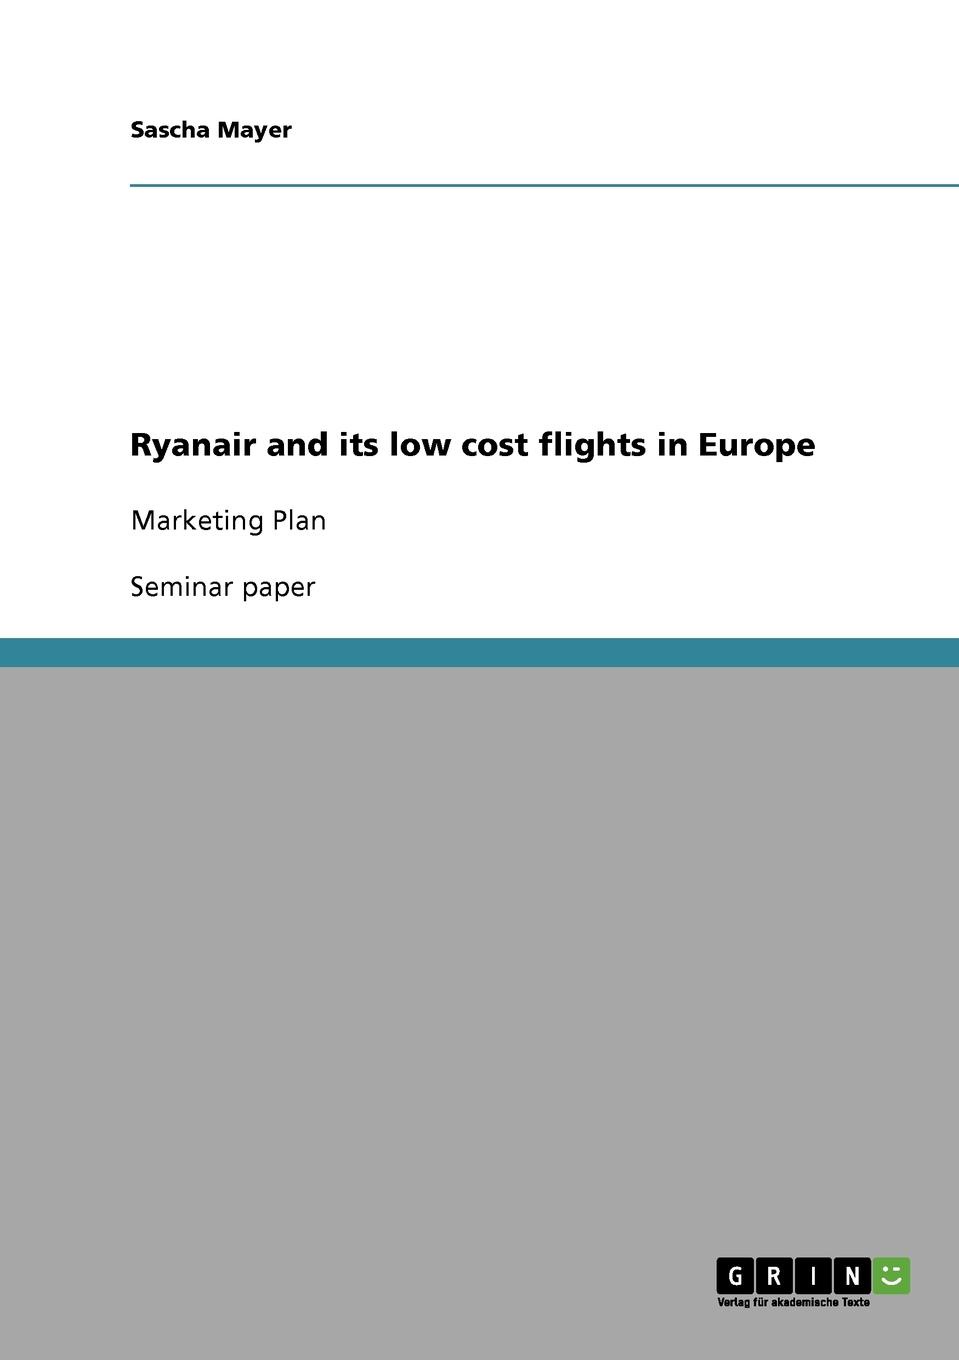 фото Ryanair and its low cost flights in Europe